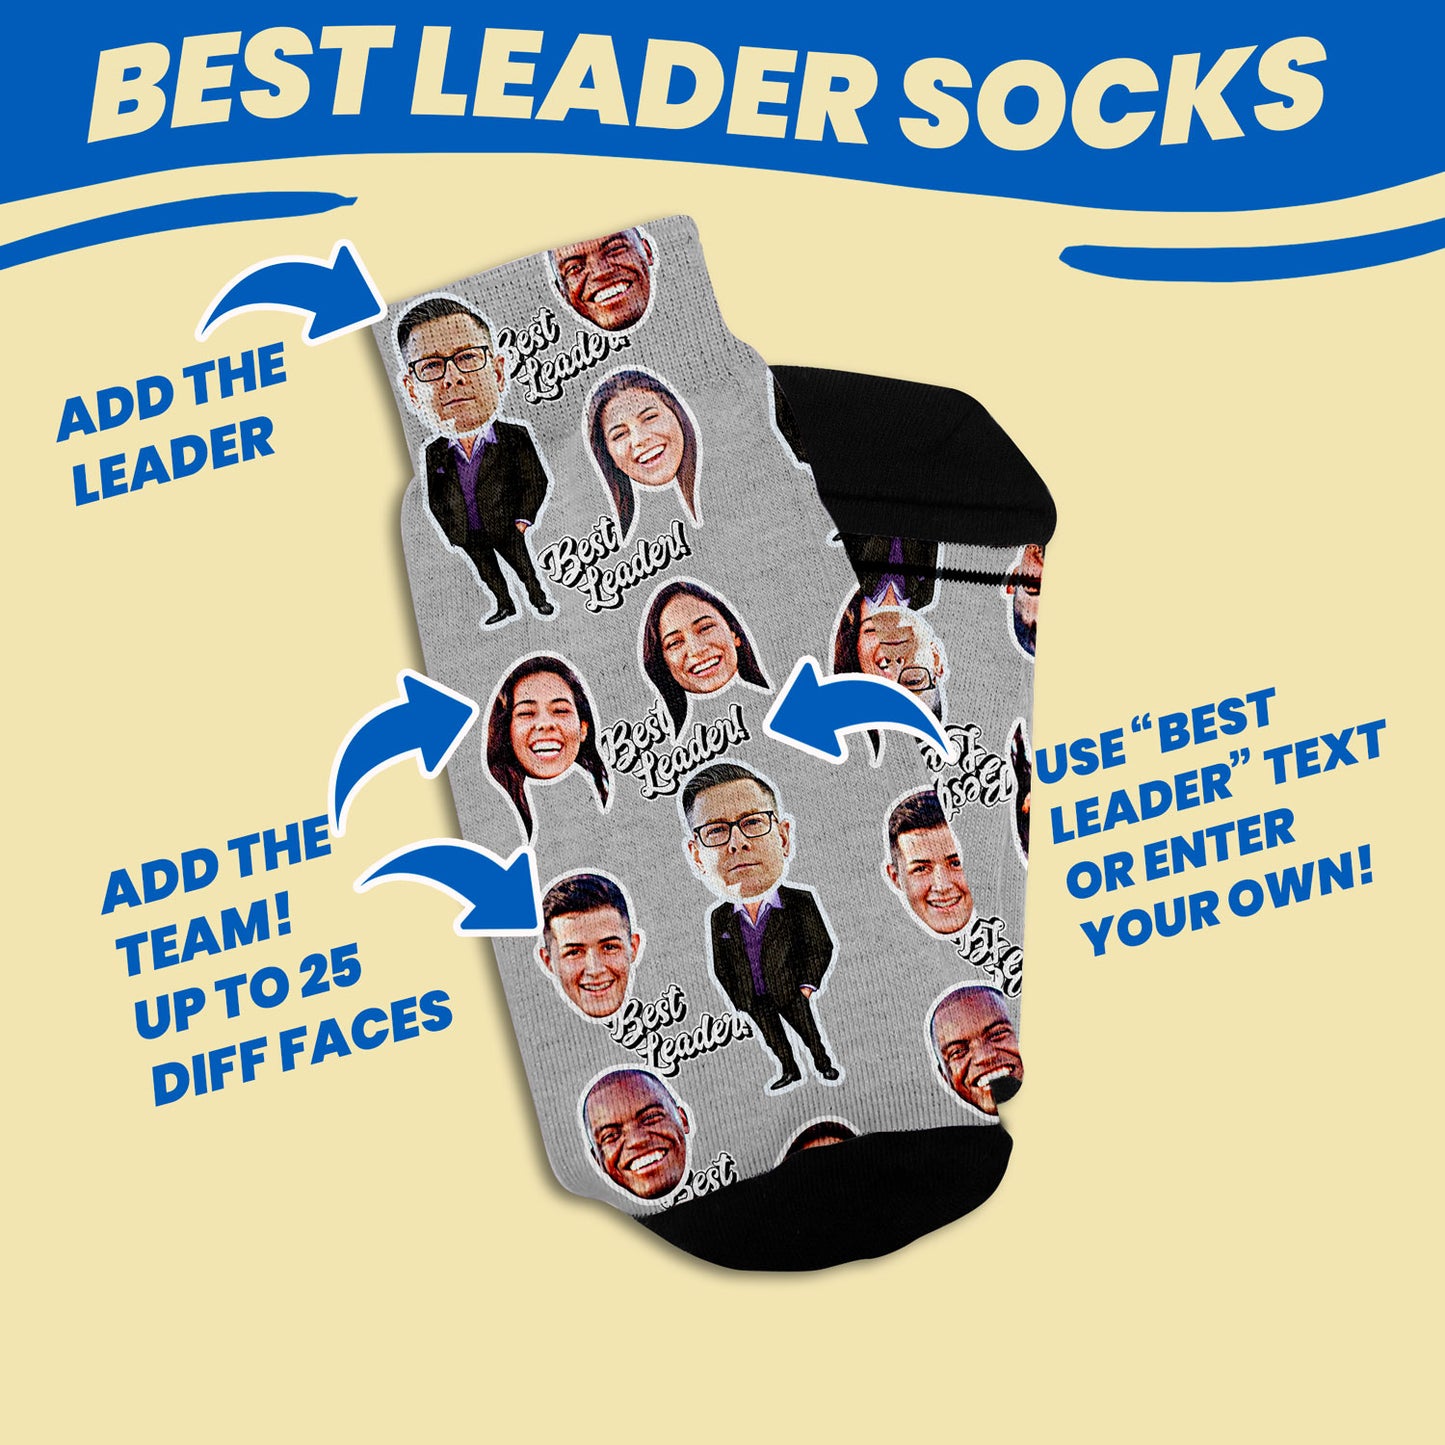 personalized gift socks for boss dat including boss and coworkers in grey